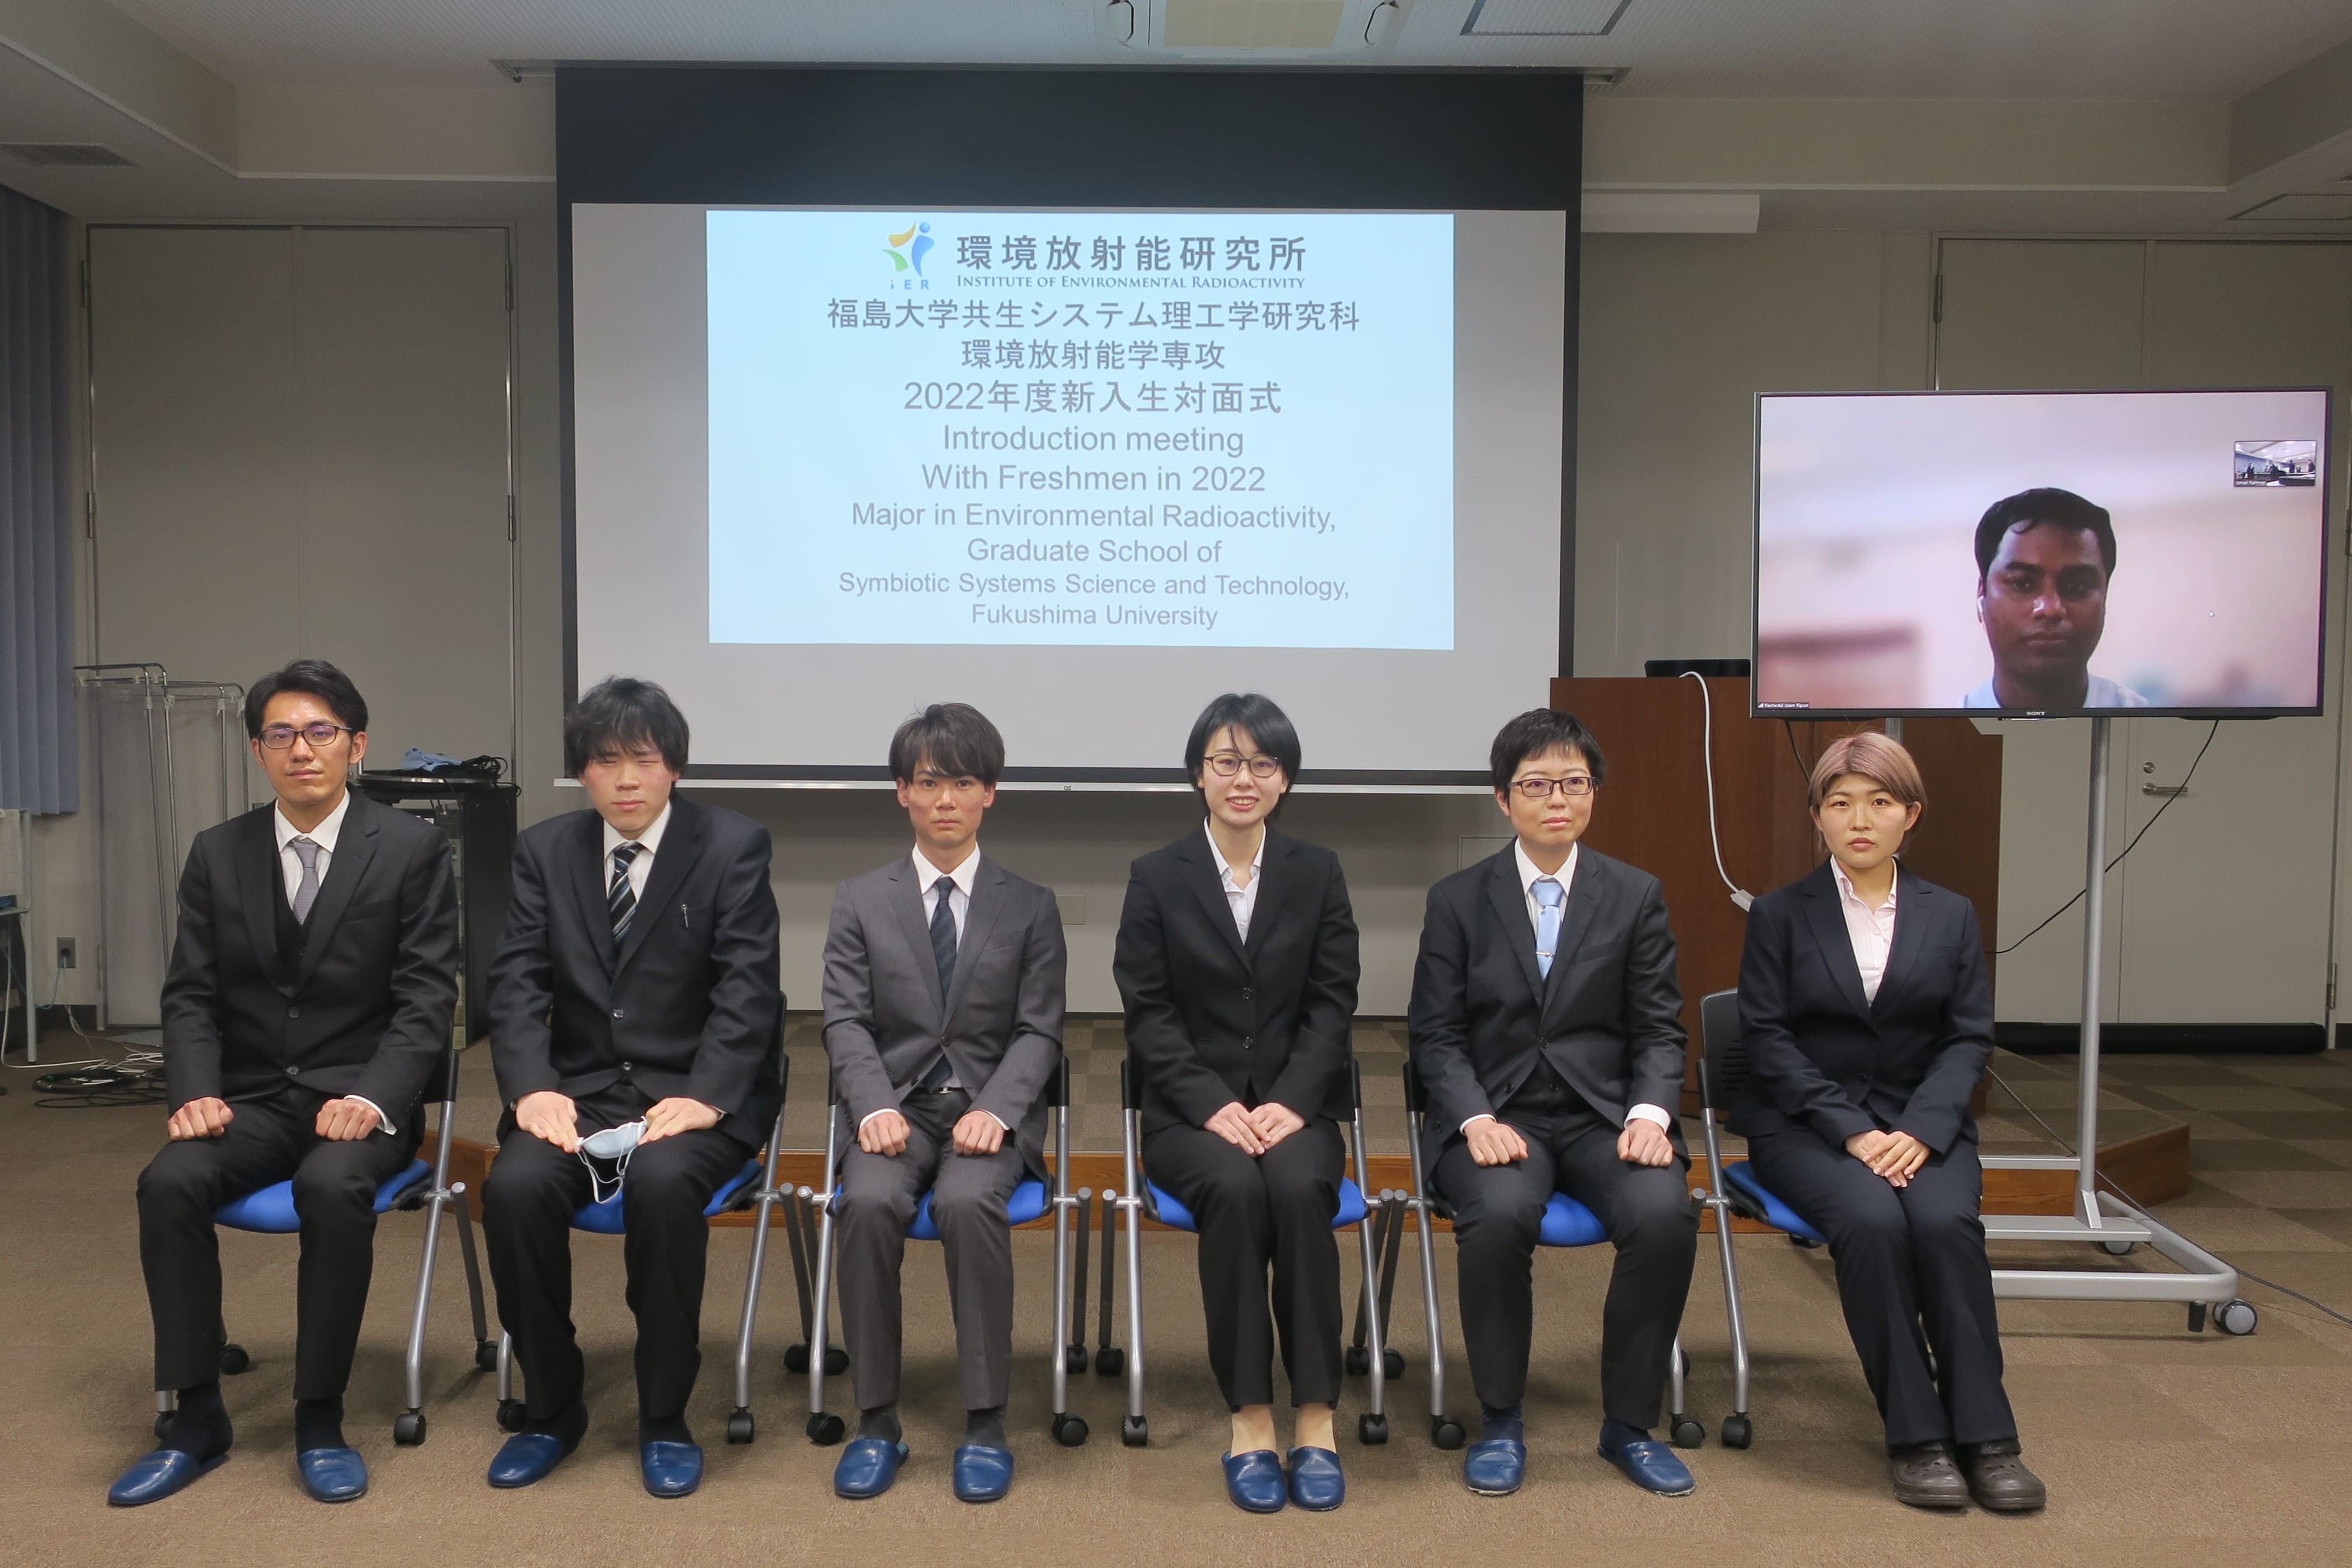 Seven freshmen enrolled in the Major in Environmental Radioactivity including one who participated in the ceremony online